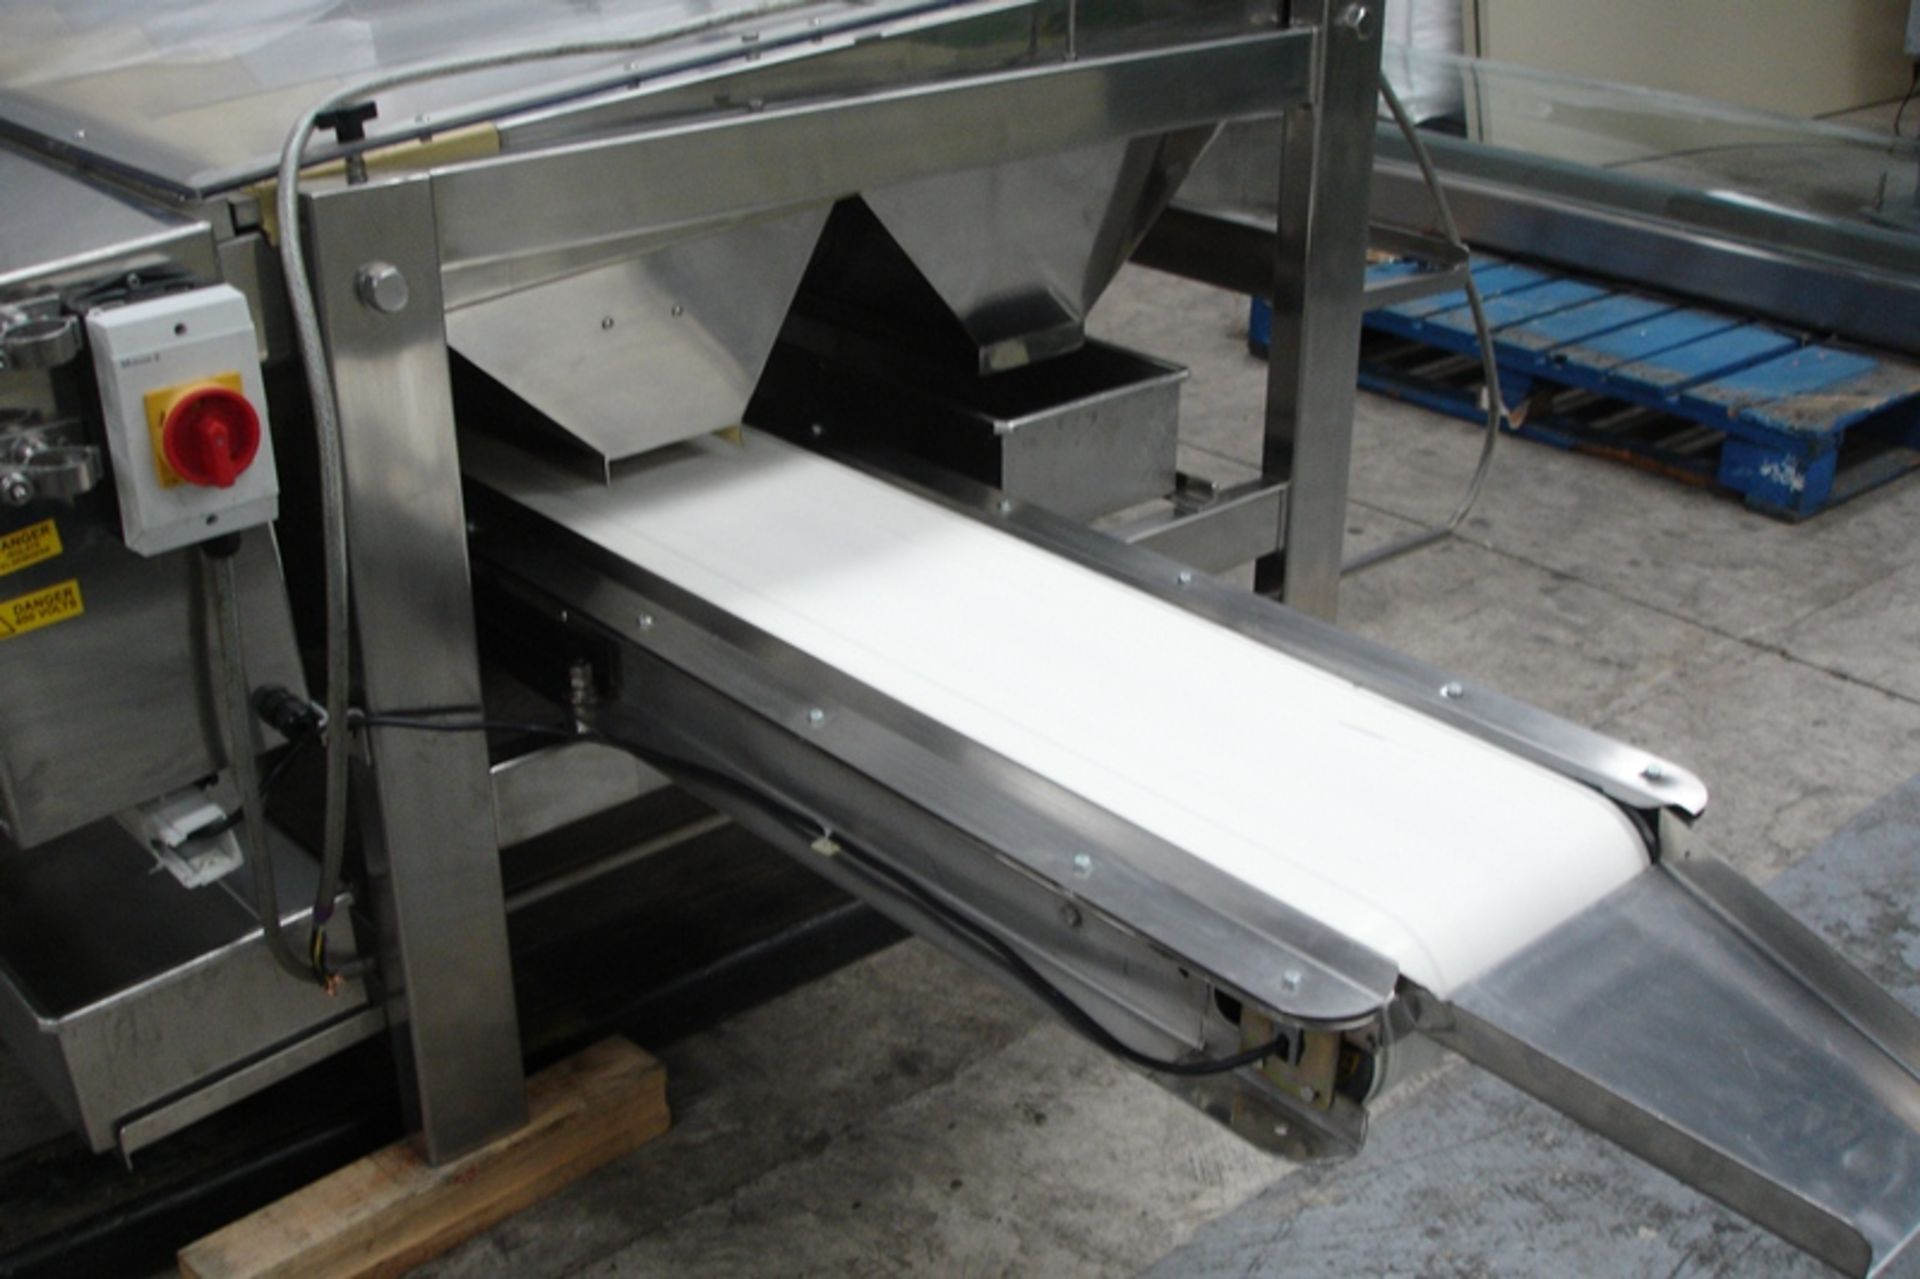 Fully Stainless Steel food grade 5 Lane Sizing / Grading Machine with Outfeed Conveyor - Image 5 of 7